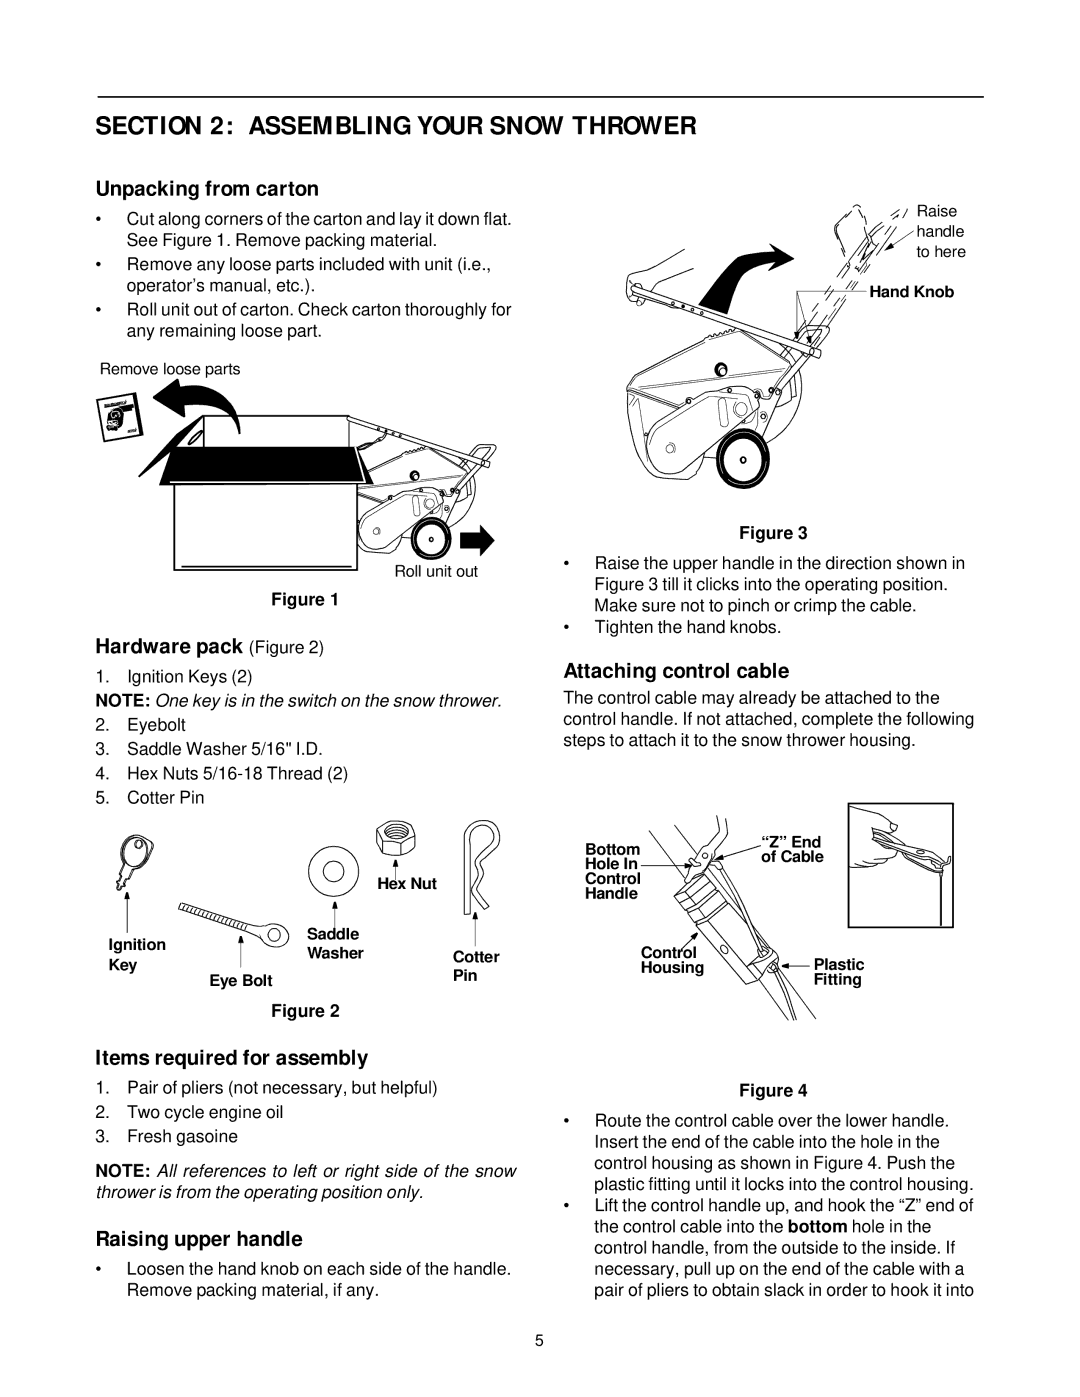 White Outdoor SB 45 manual Assembling Your Snow Thrower 